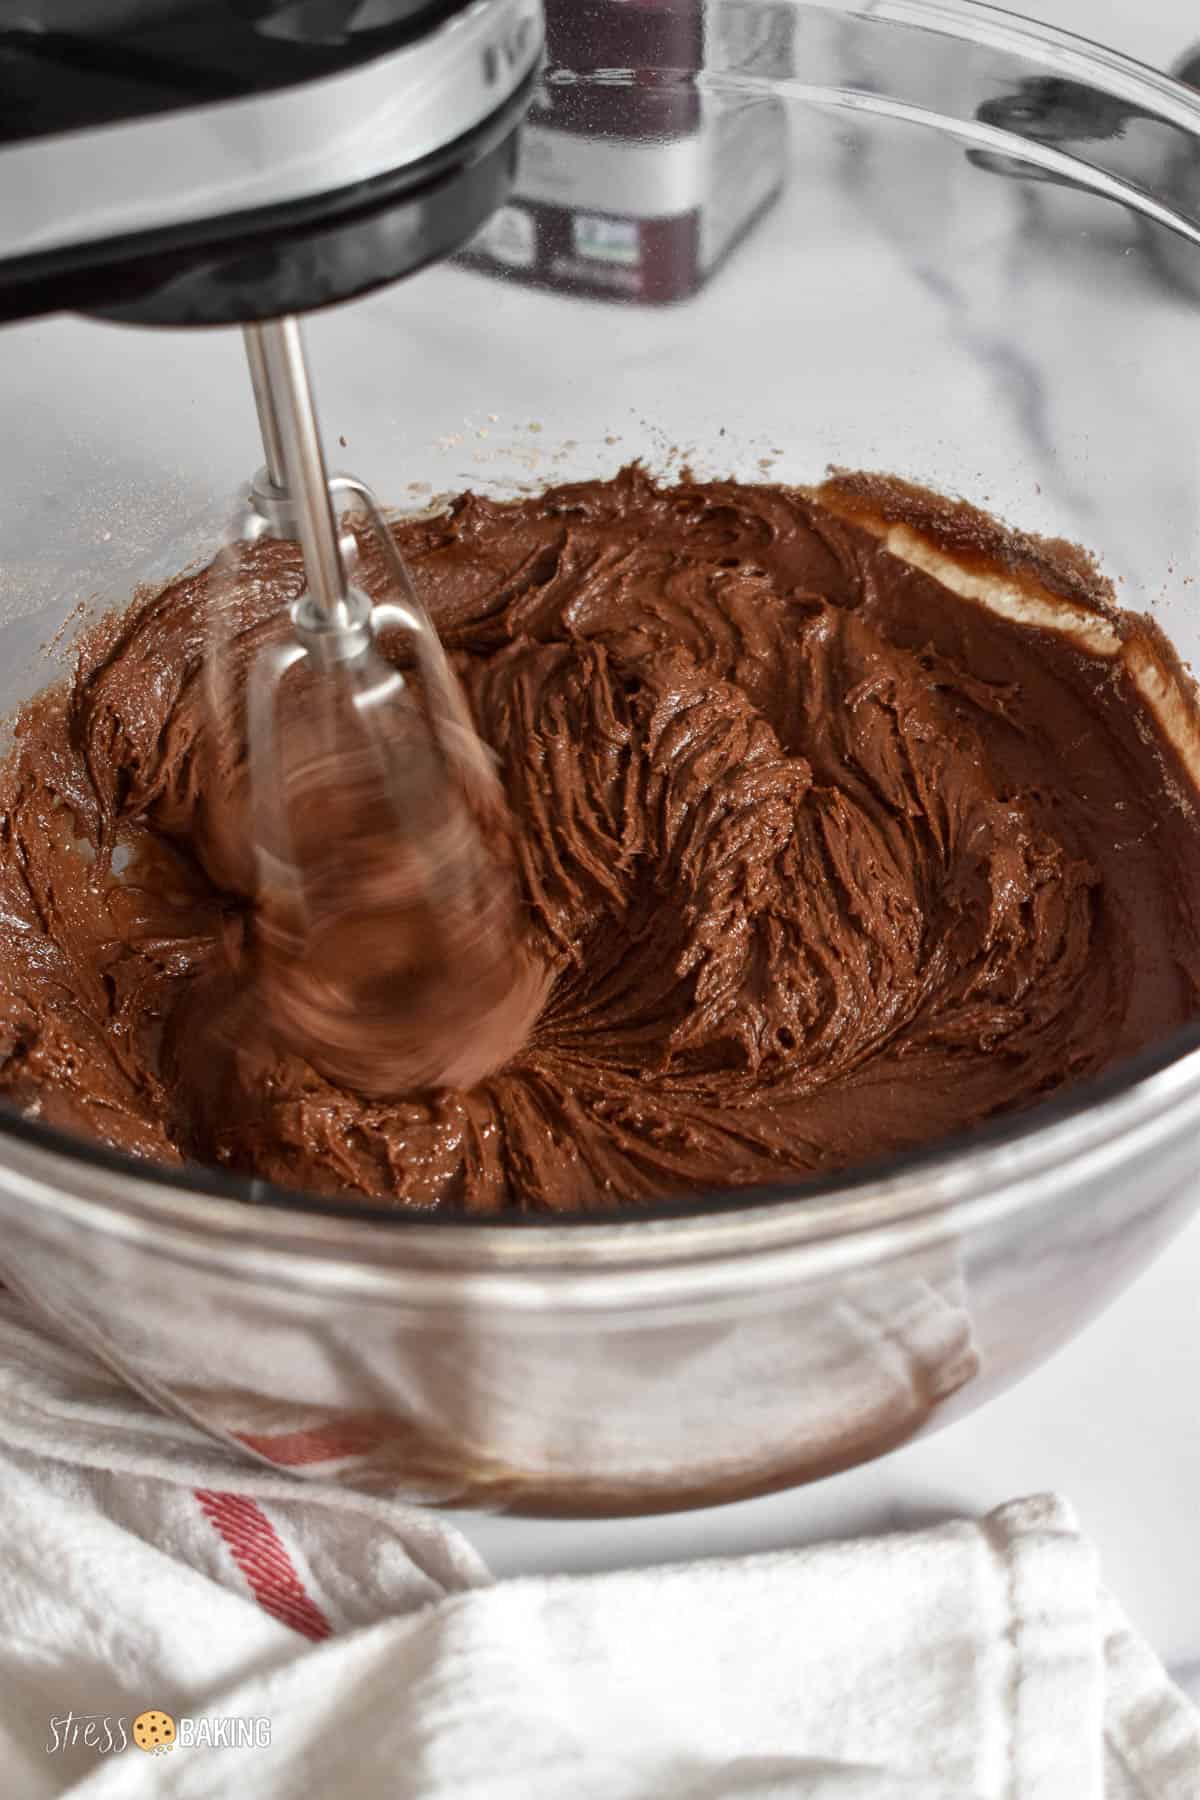 Chocolate cookie dough being mixed with a hand mixer